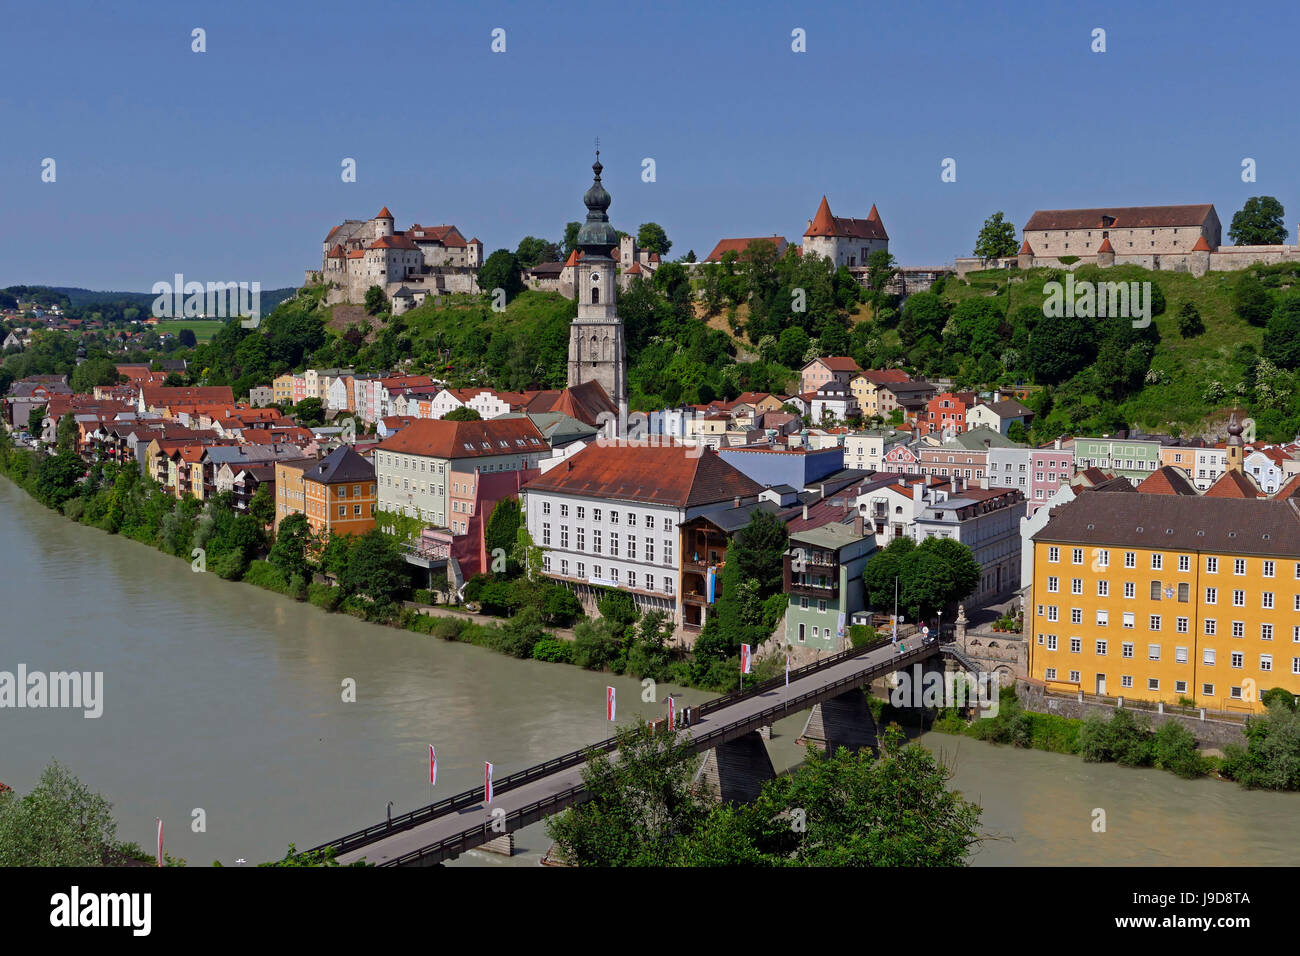 Salzach River and Old Town with Castle, Burghausen, Upper Bavaria, Bavaria, Germany, Europe Stock Photo